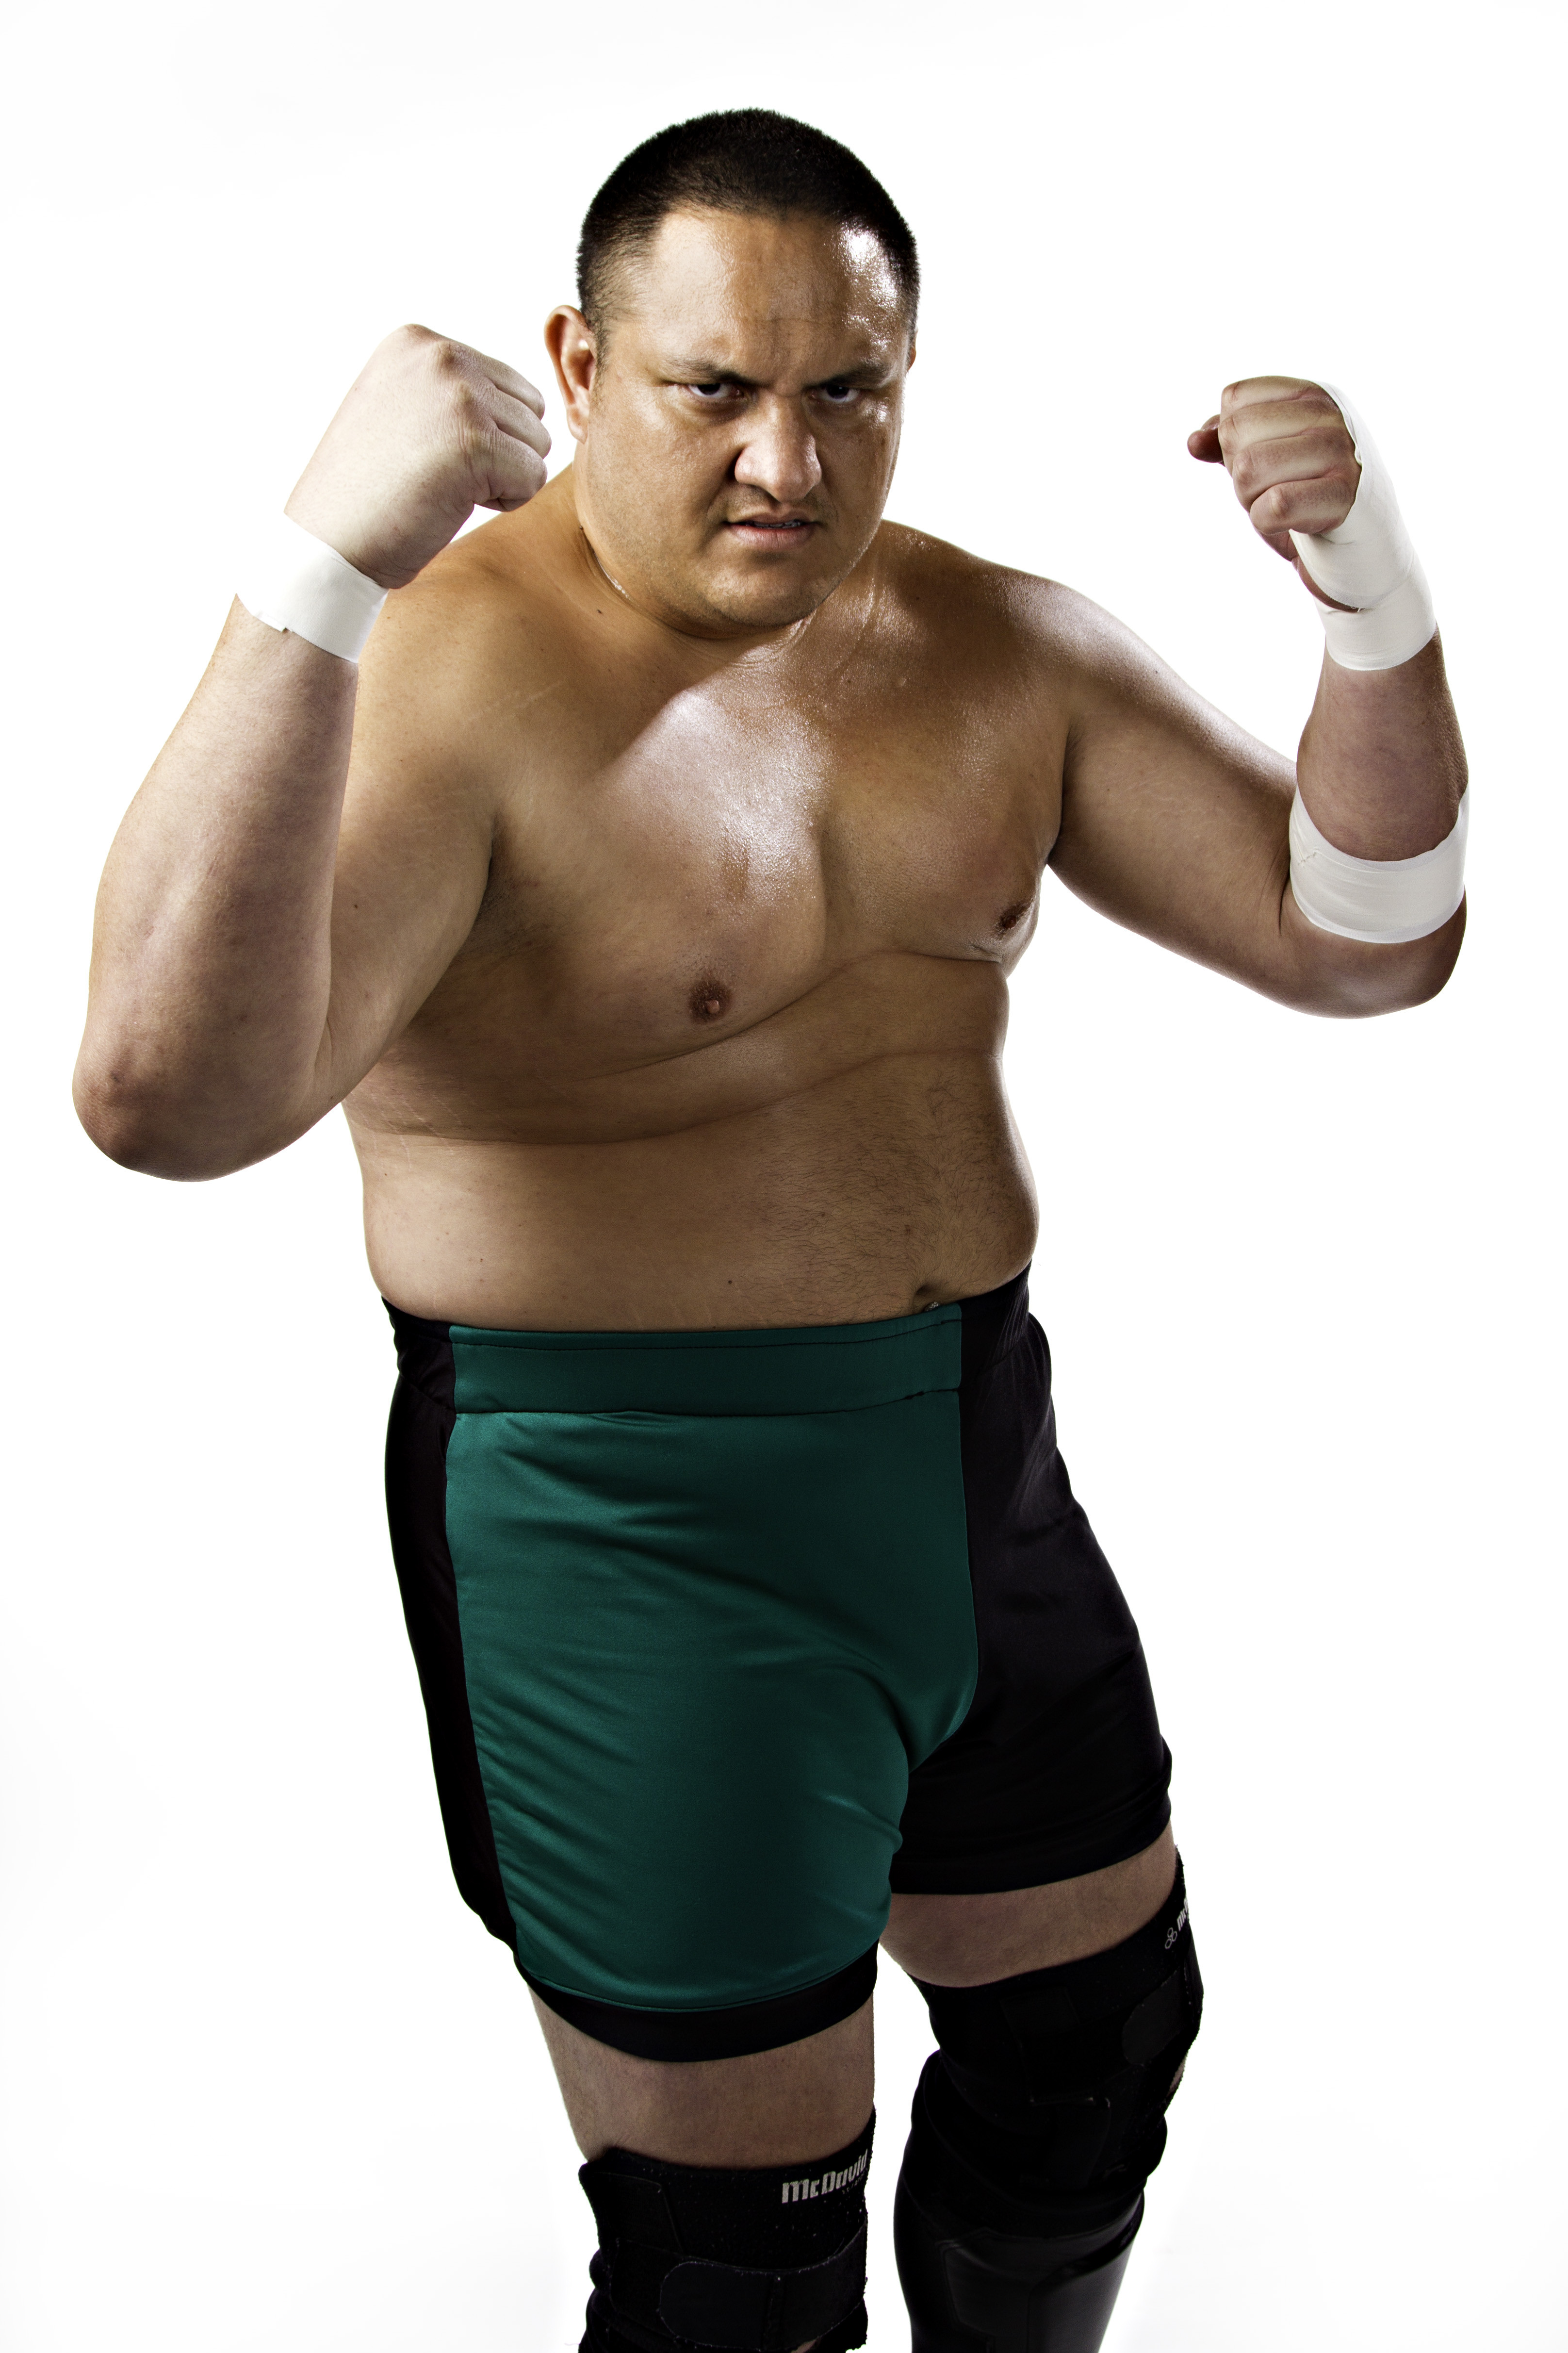 Samoa Joe looks to put a submission hold on the Bound for Glory Series